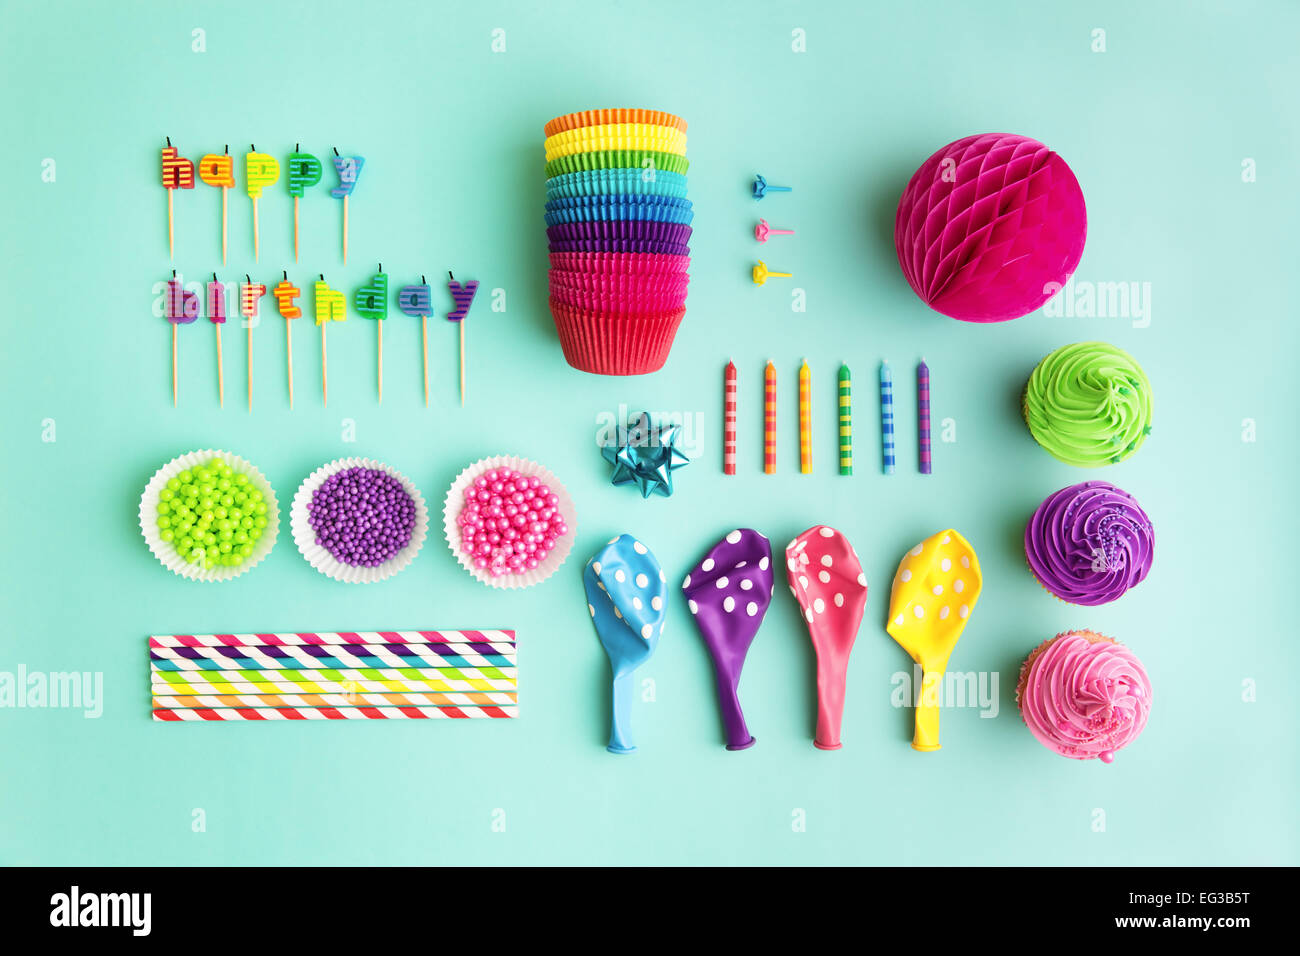 Overhead view of birthday party object collection Stock Photo